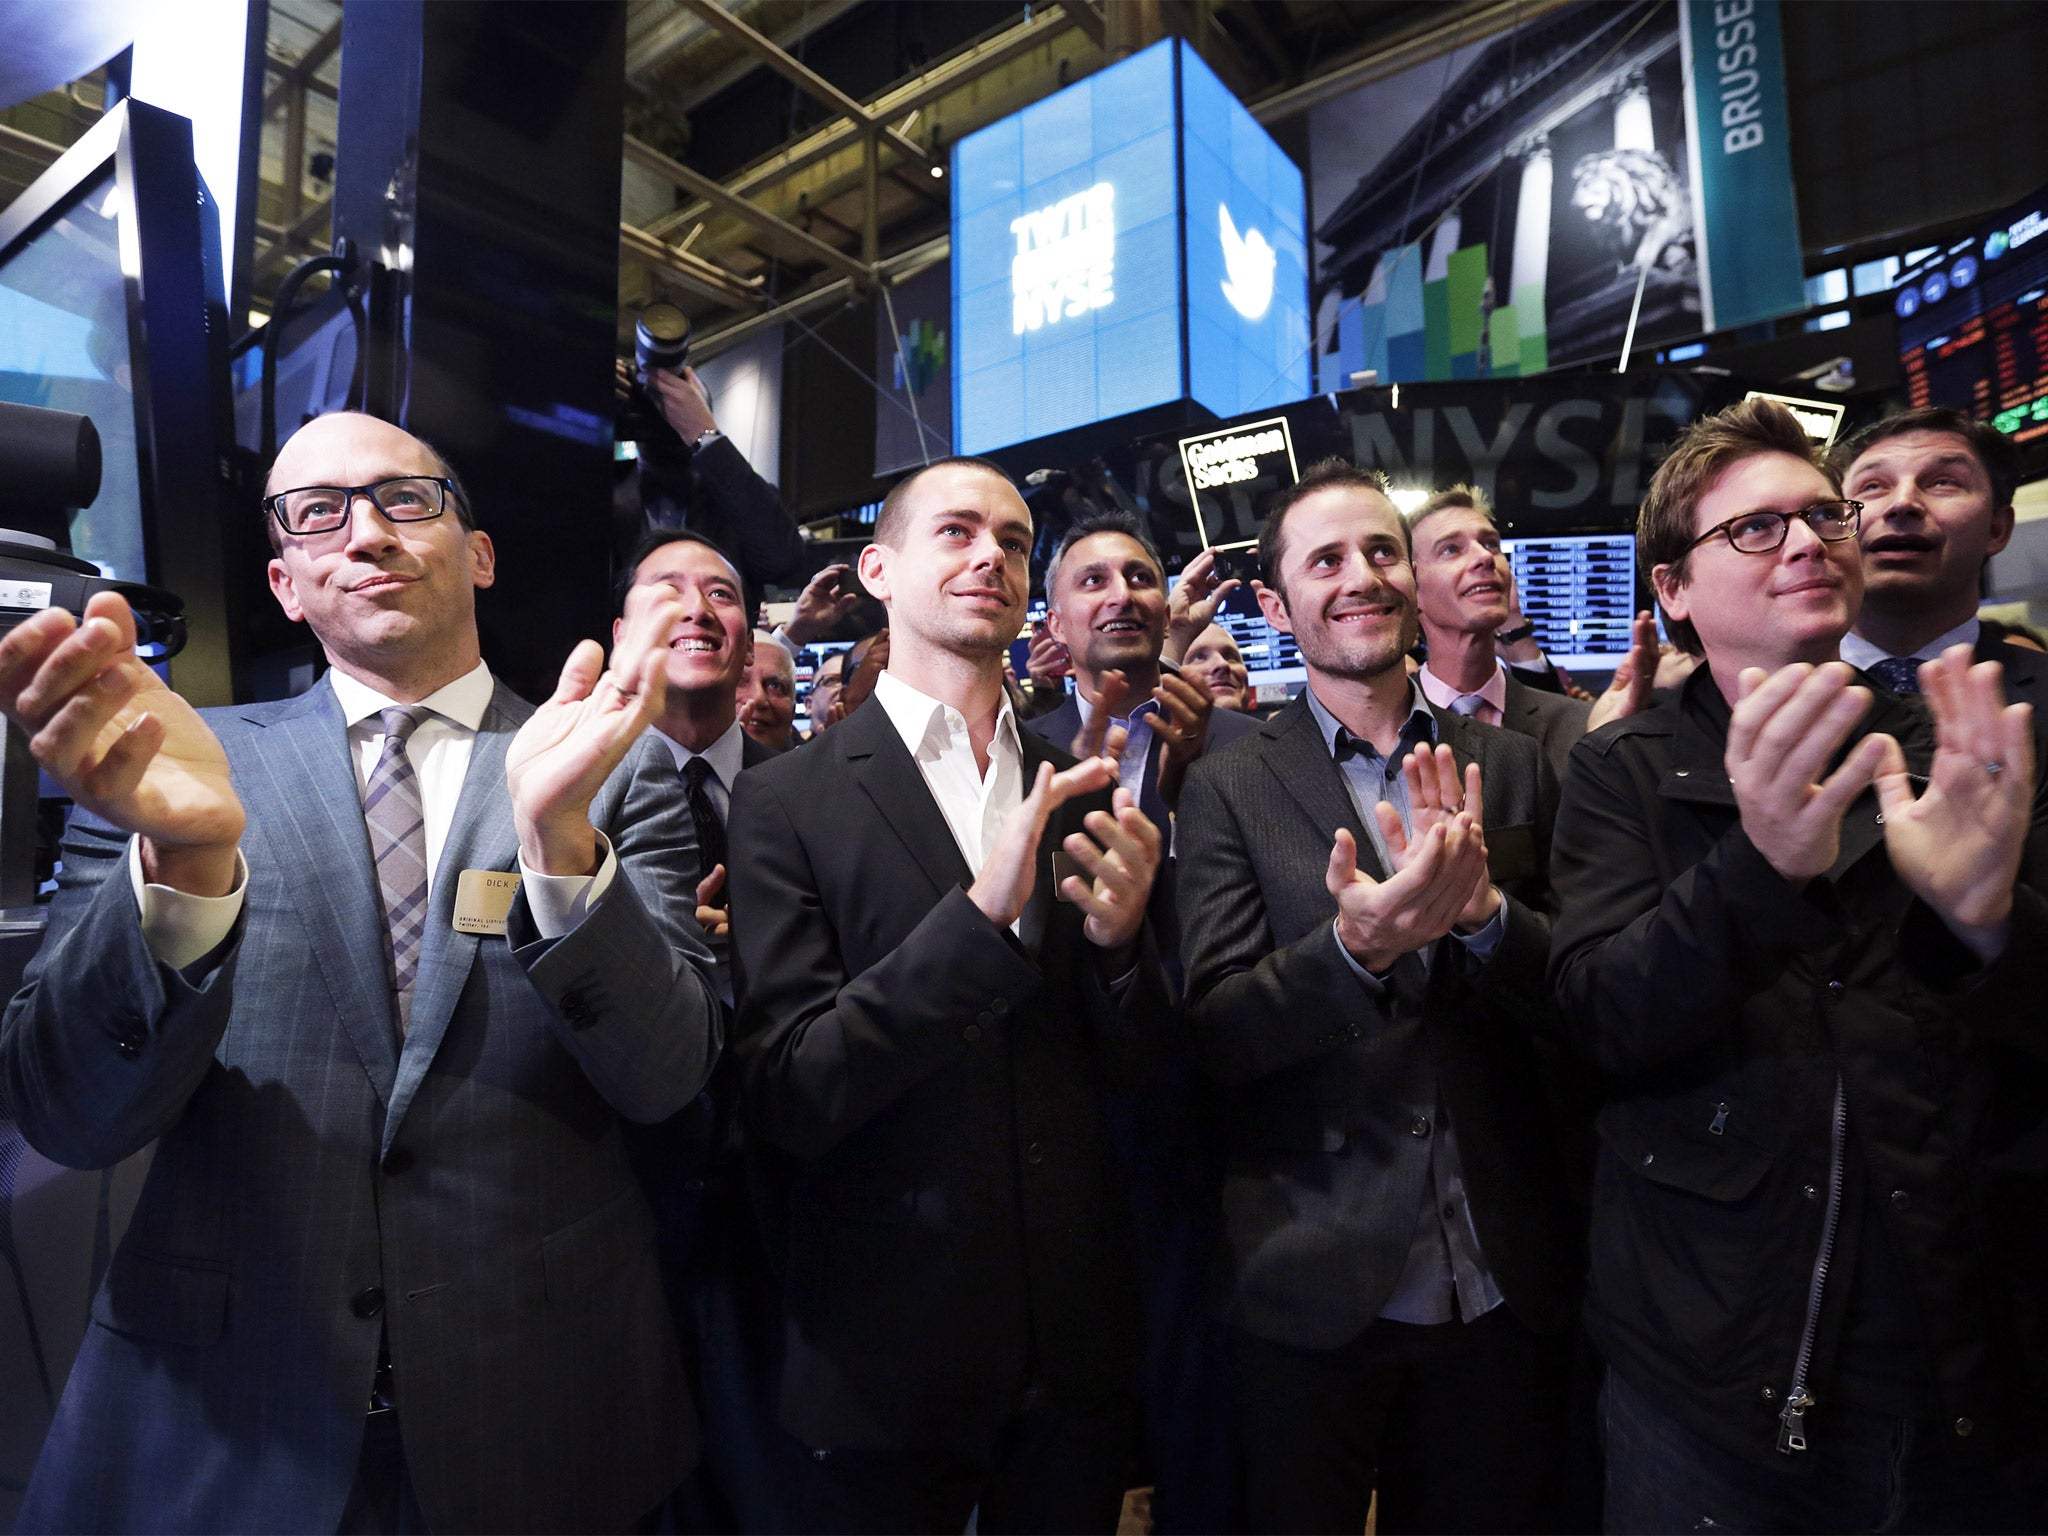 Going up: Twitter’s founders, including Jack Dorsey (second from left) at the New York Stock Exchange